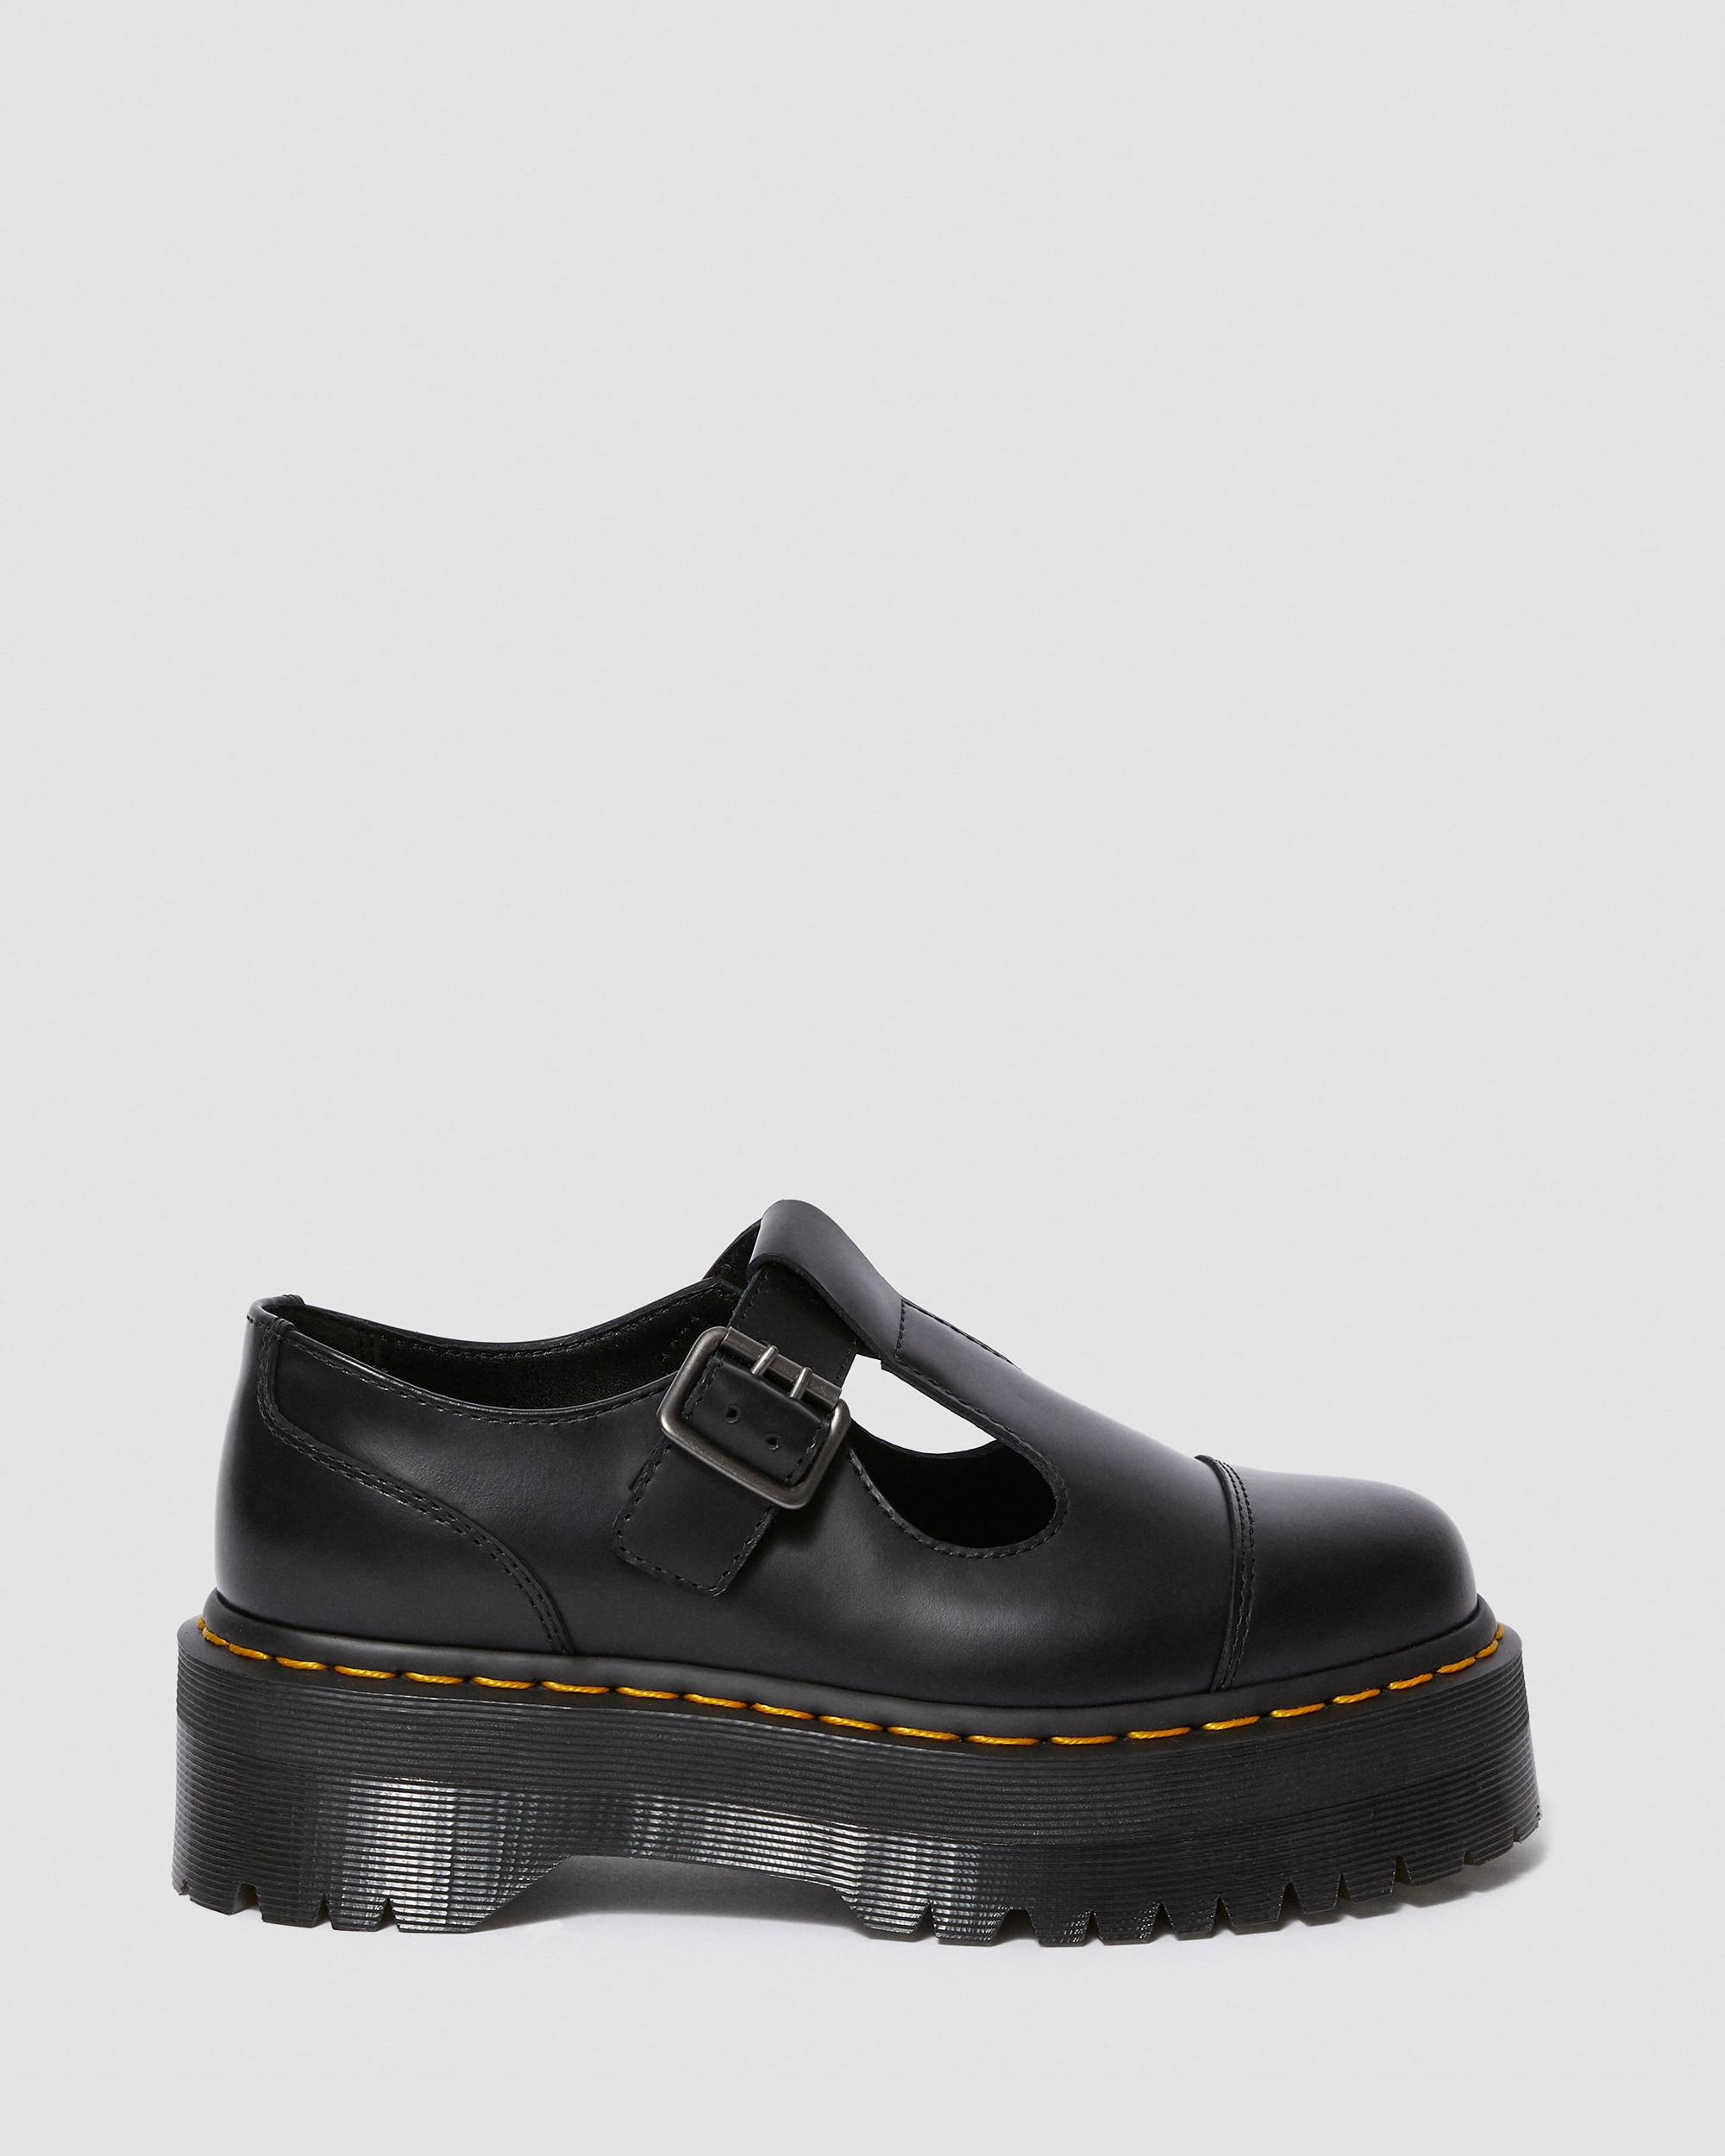 Bethan Smooth Leather Platform Mary Jane Shoes in Black